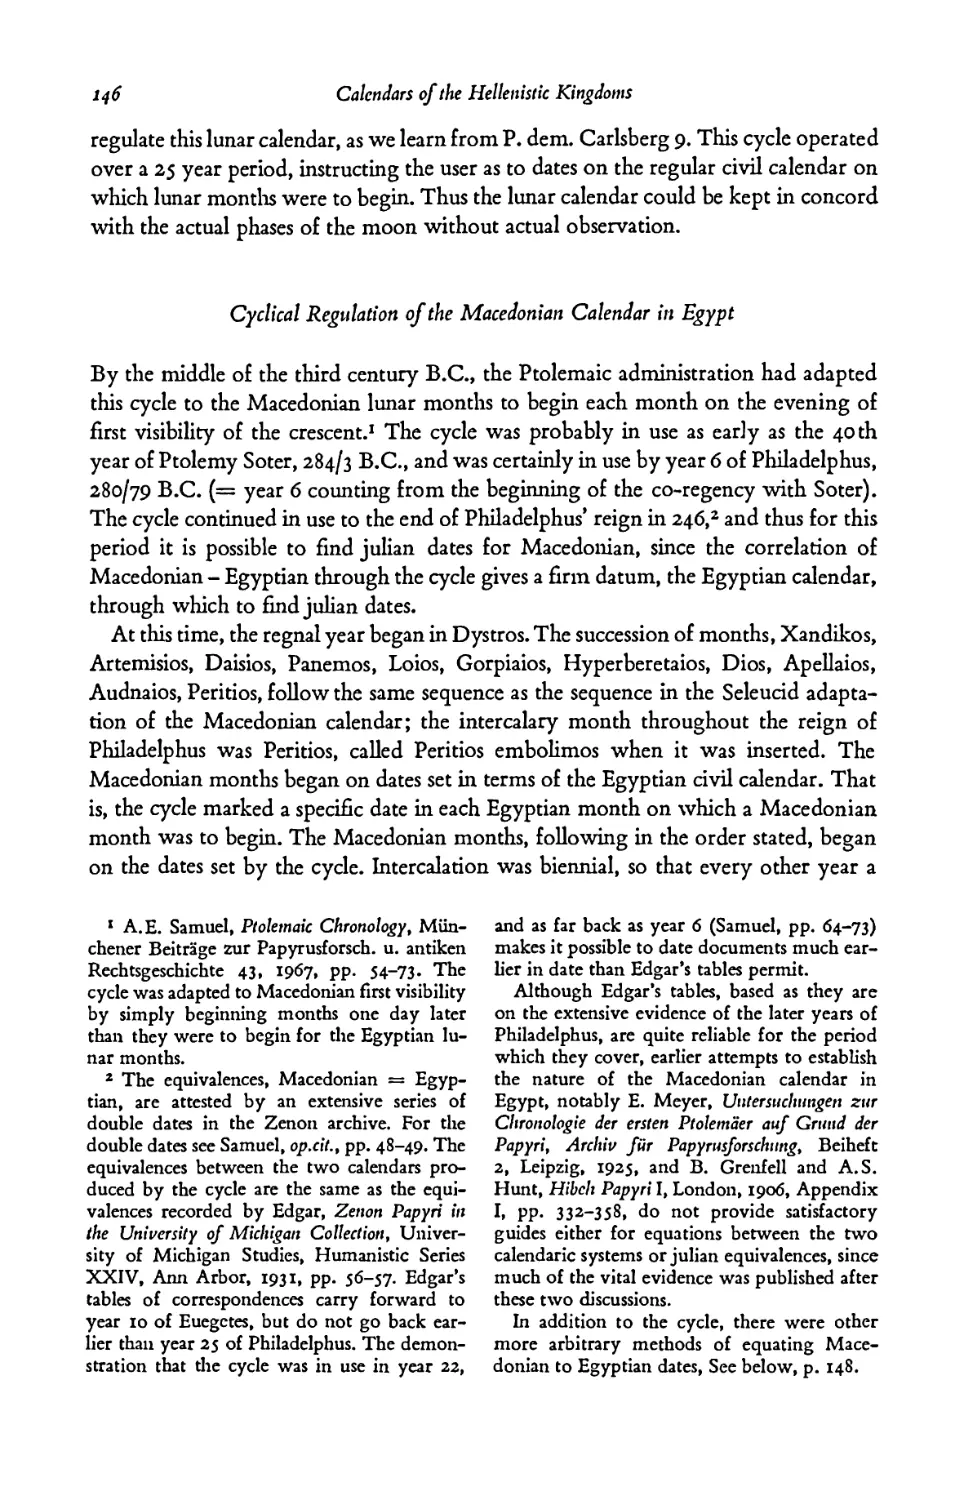 - Cyclical Regulation of the Macedonian Calendar in Egypt